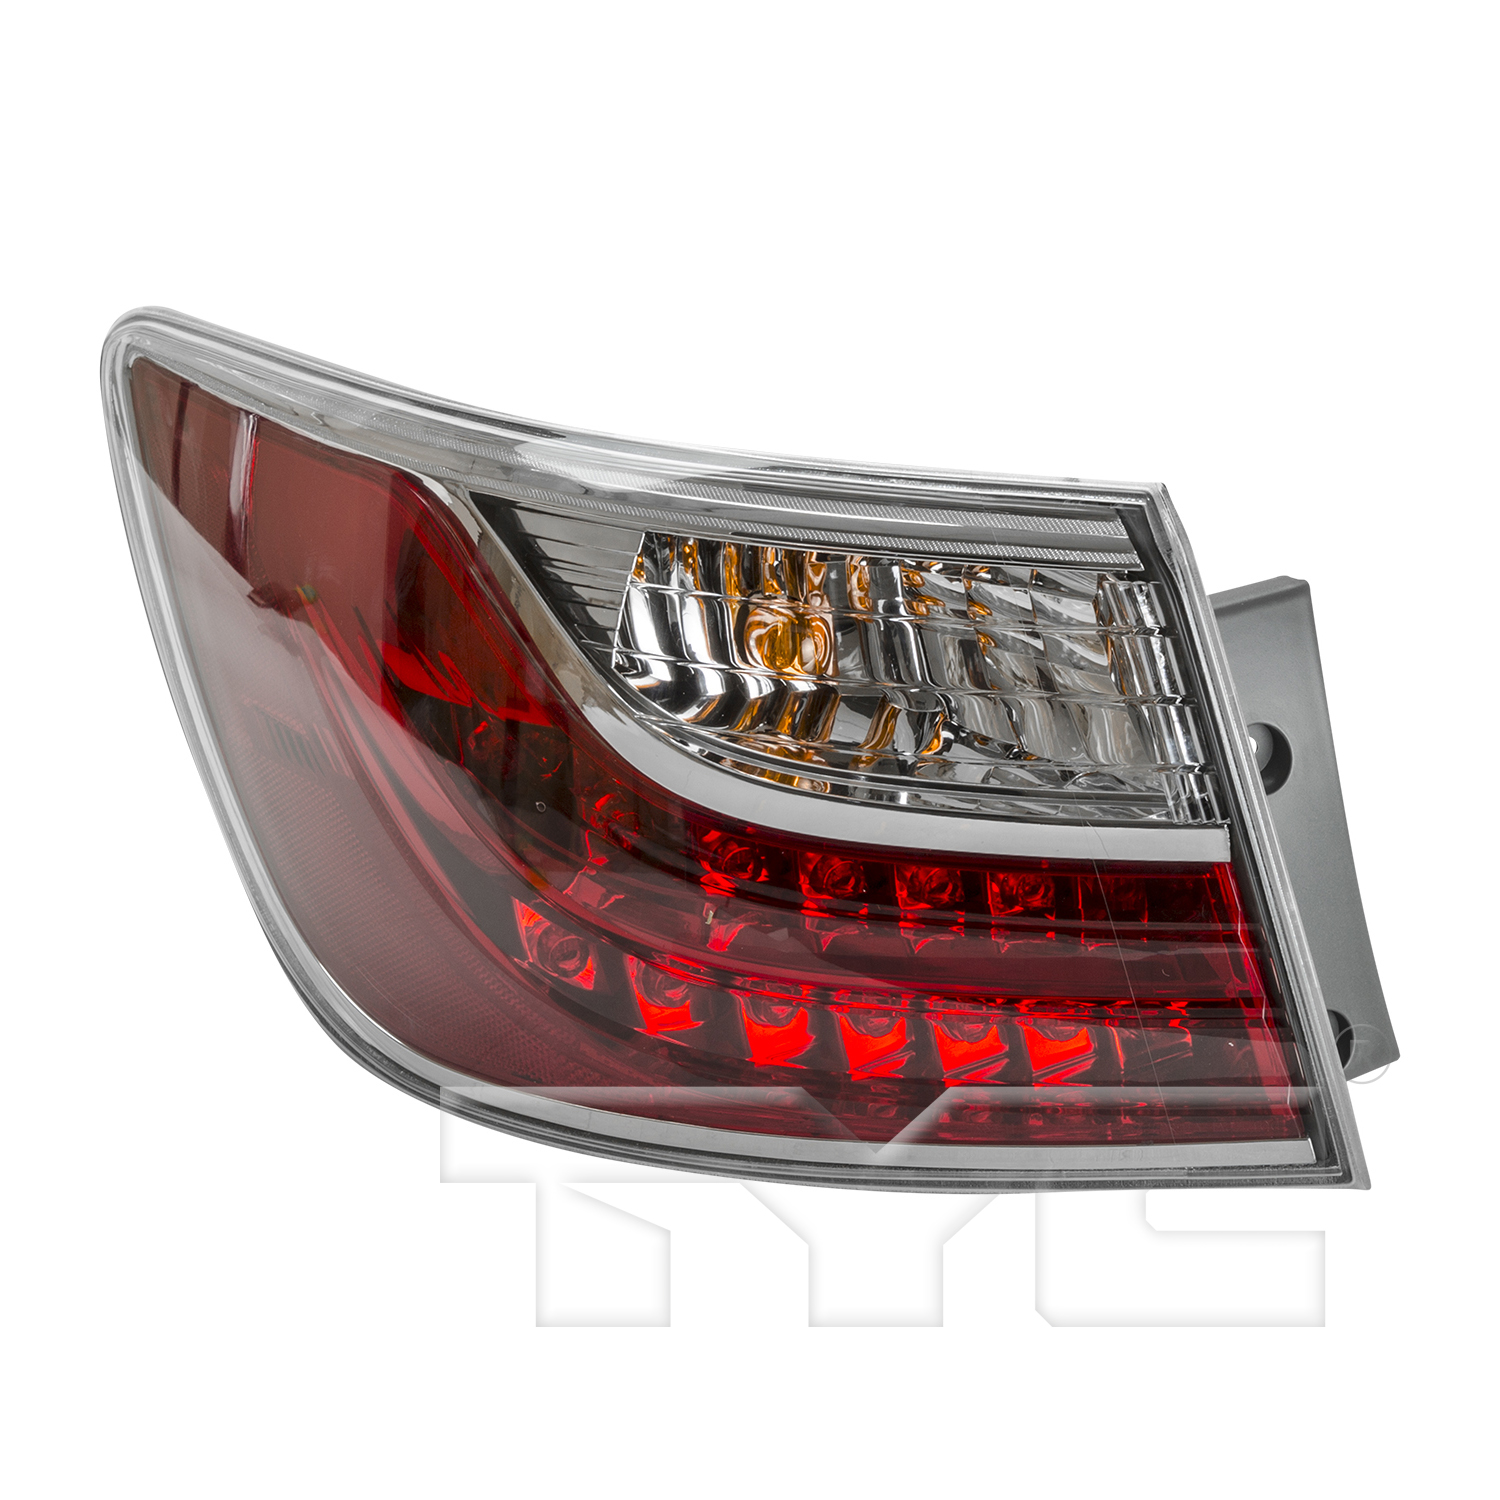 Aftermarket TAILLIGHTS for MAZDA - CX-9, CX-9,10-12,LT Taillamp assy outer